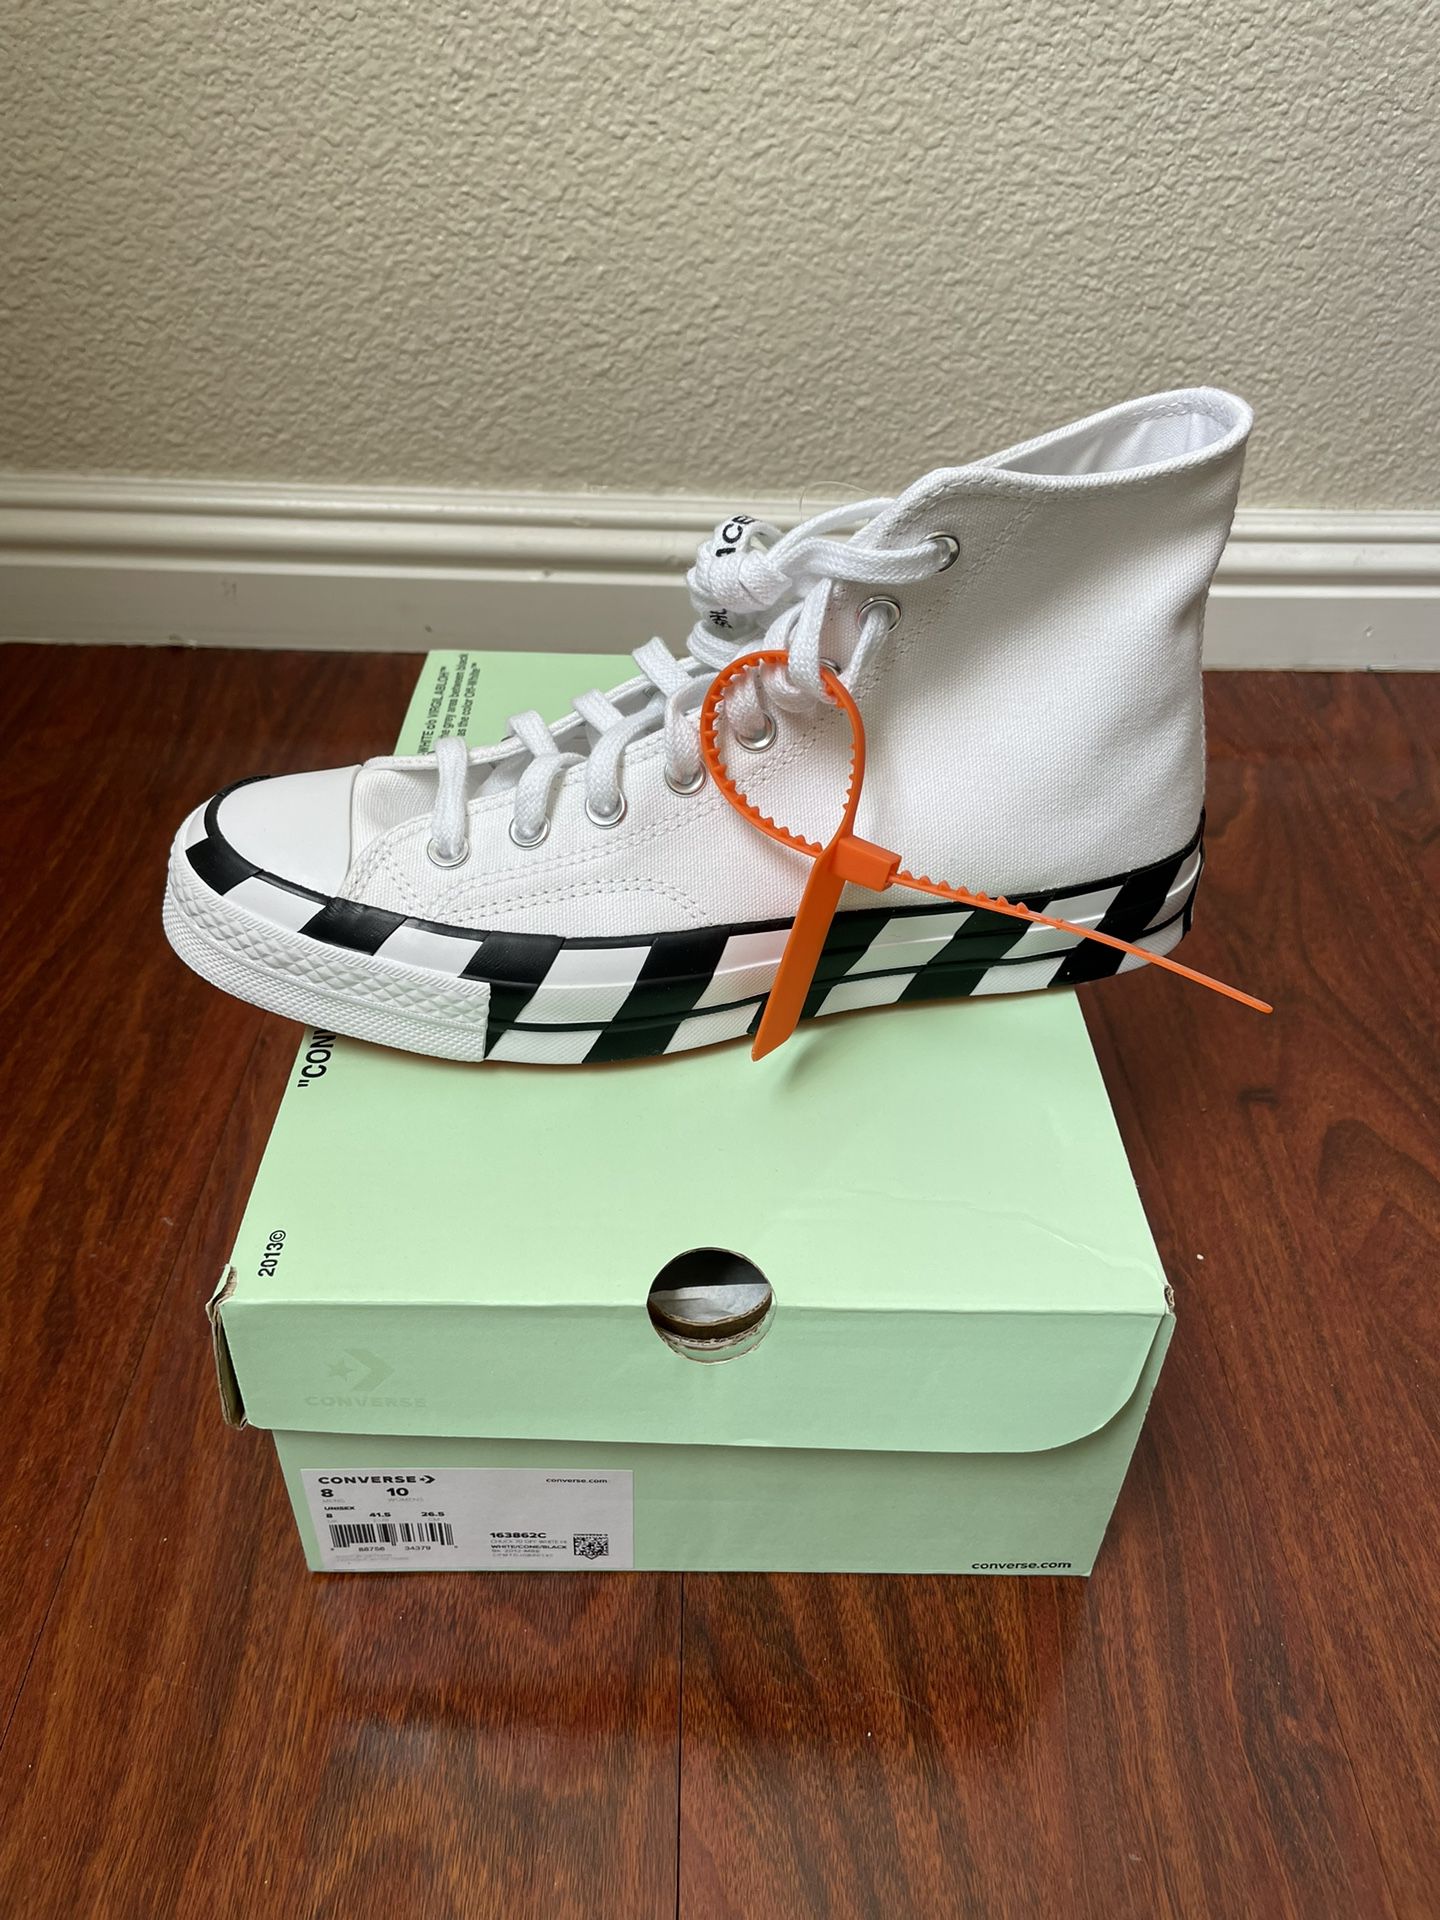 Off White Converse Chuck Taylor 70 All Star Hi Size 8